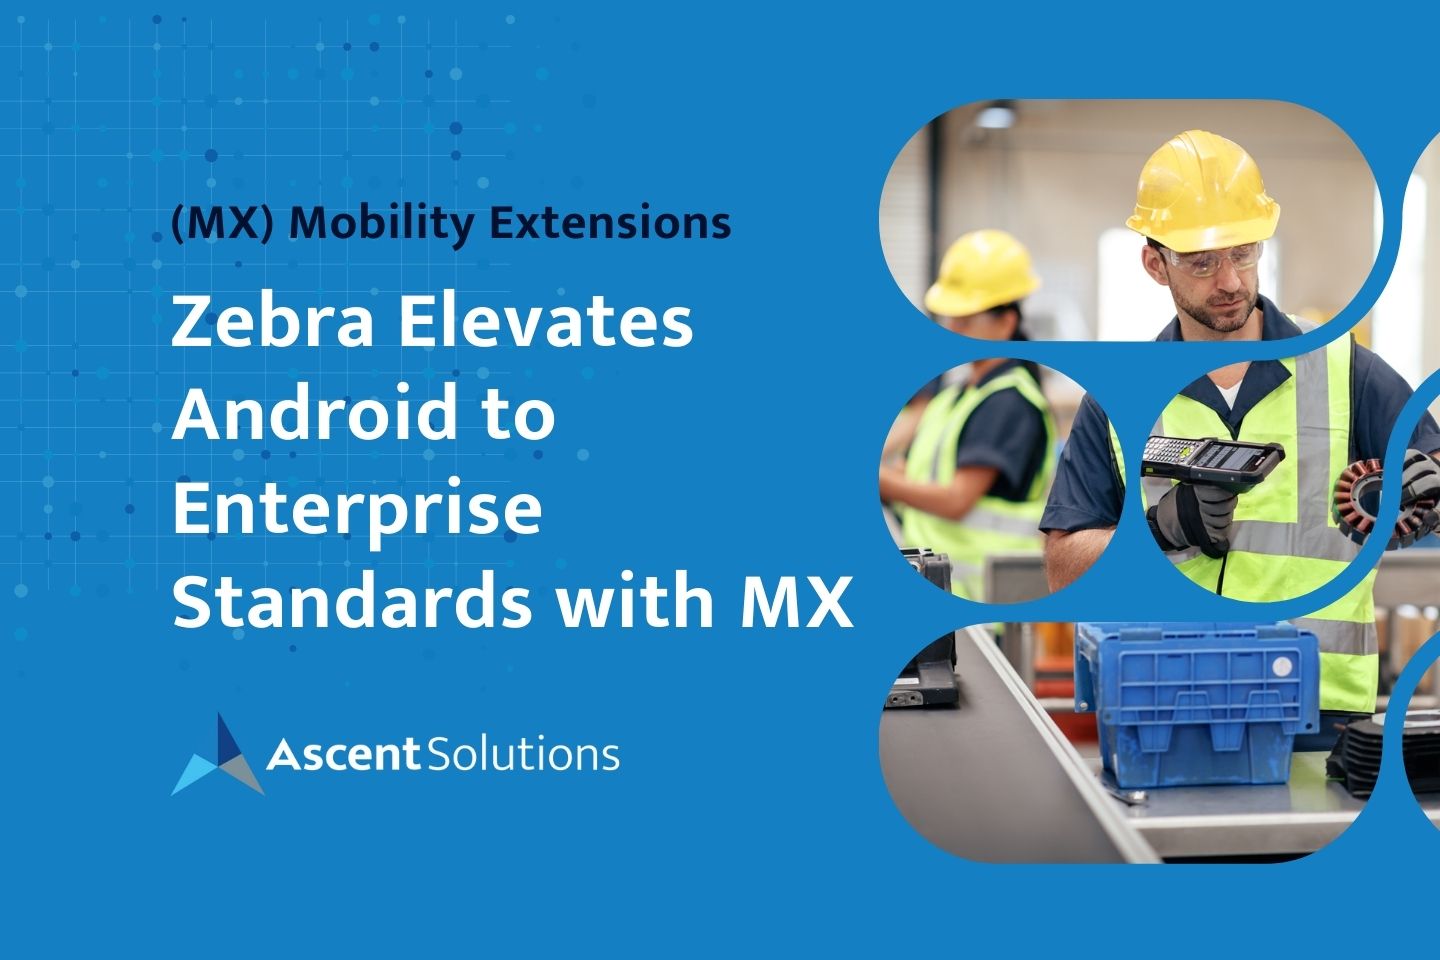 Zebra Elevates Android to Enterprise Standards with MX Mobility Extensions